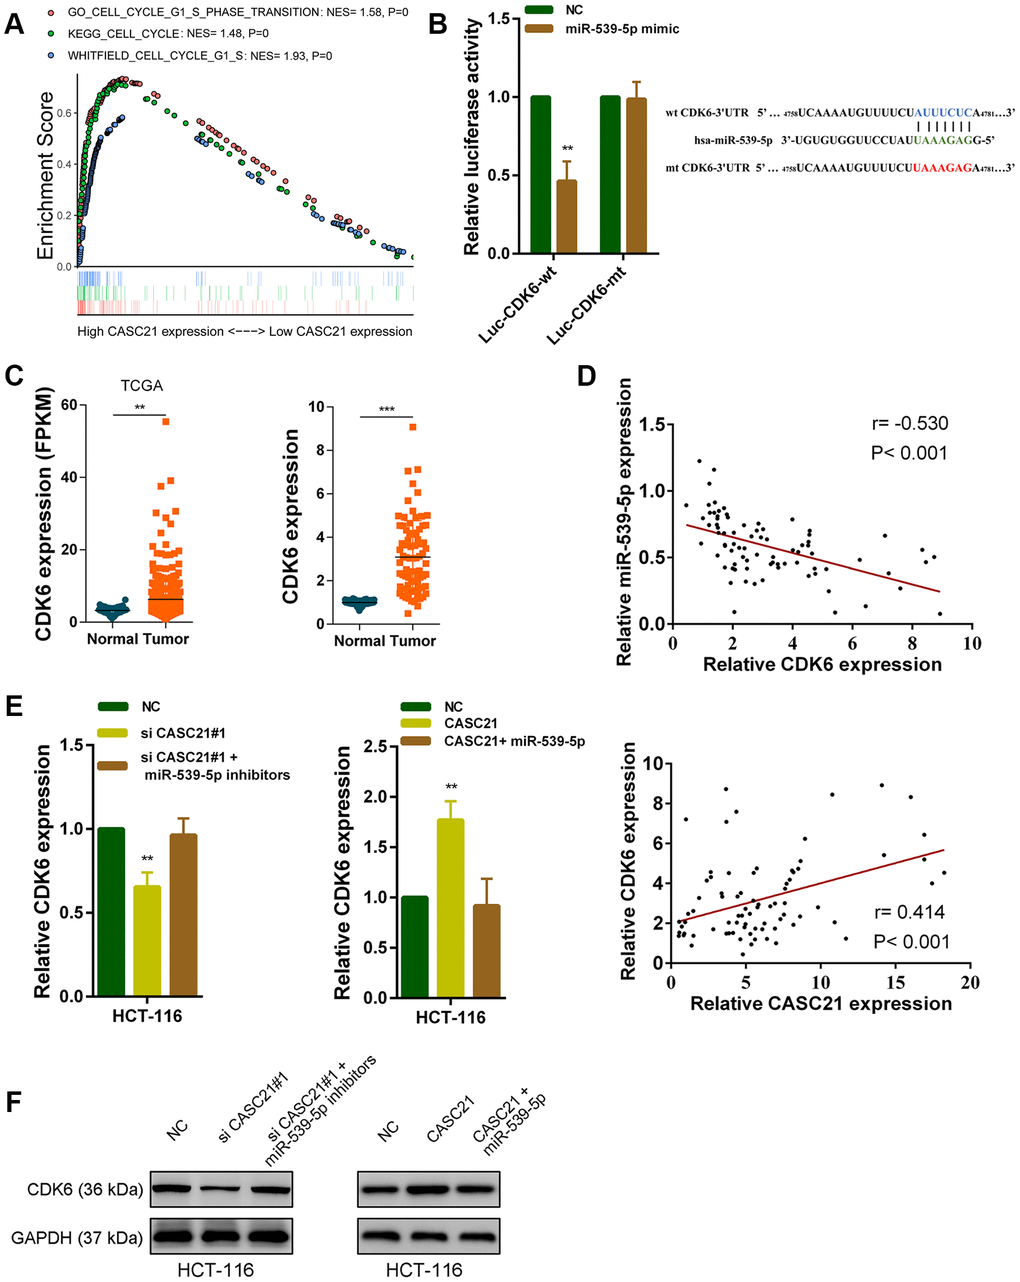 CASC21 regulates CDK6 expression by sponging miR-539-5p in CRC. (A) GSEA results were plotted to visualize the correlation between the expression of CASC21 and genes related to cell proliferation (KEGG